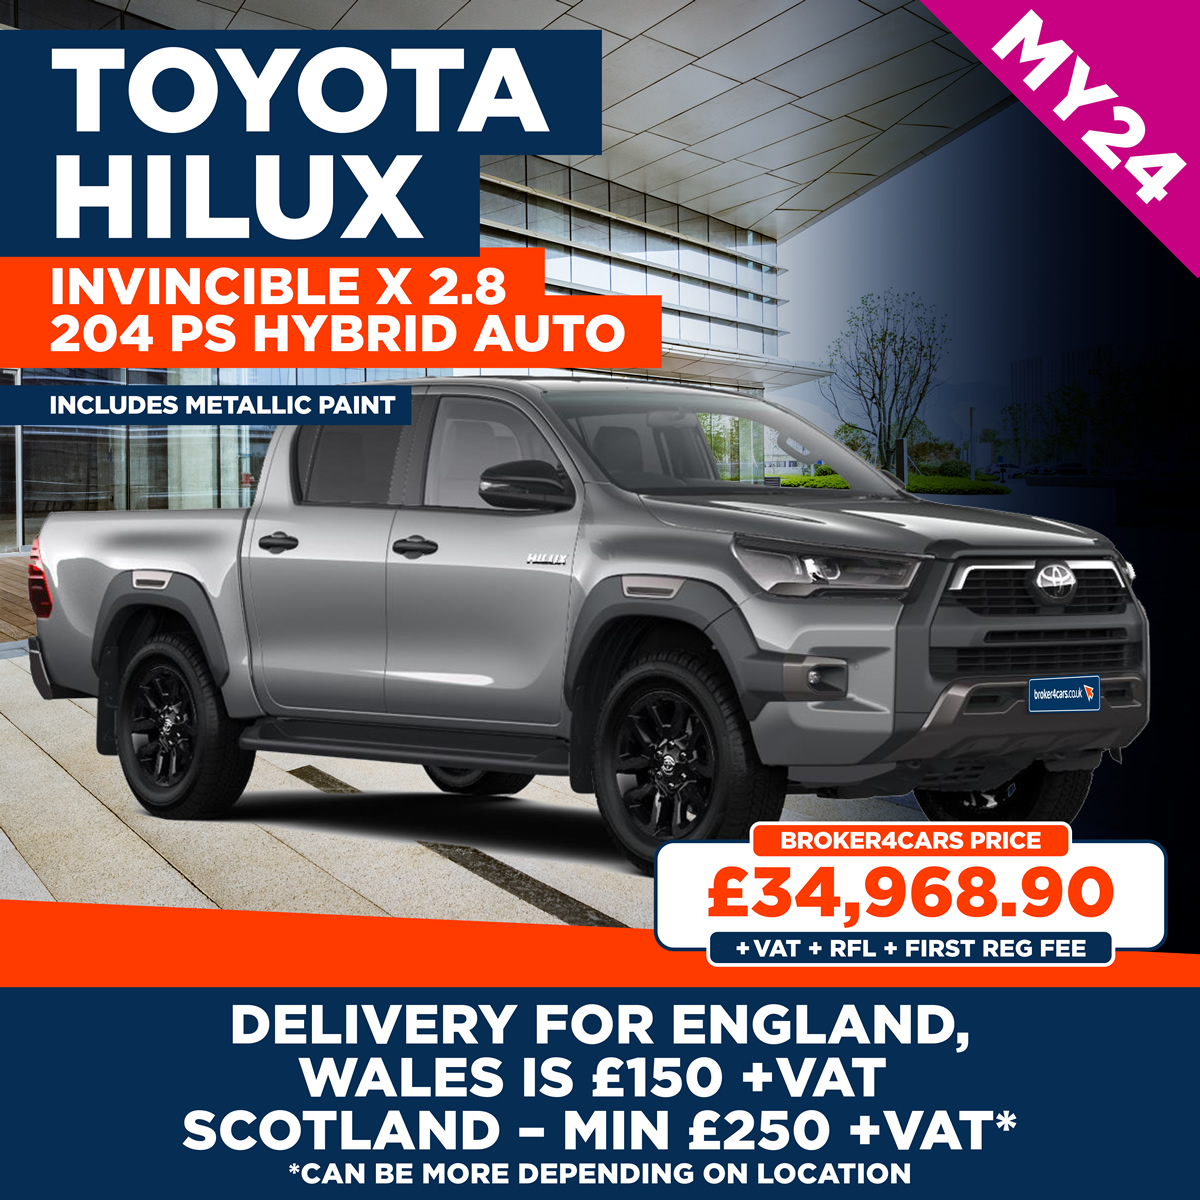 New MY24 Toyota Hilux Invincible X 2.8 204 PS Hybrid Auto includes metallic paint. Delivery for England and Wales is £150- plus VAT. Scotland – Min £250 plus VAT, but can be more depending on location. £34,968.90 +VAT + RFL £335+ First Reg Fee £55